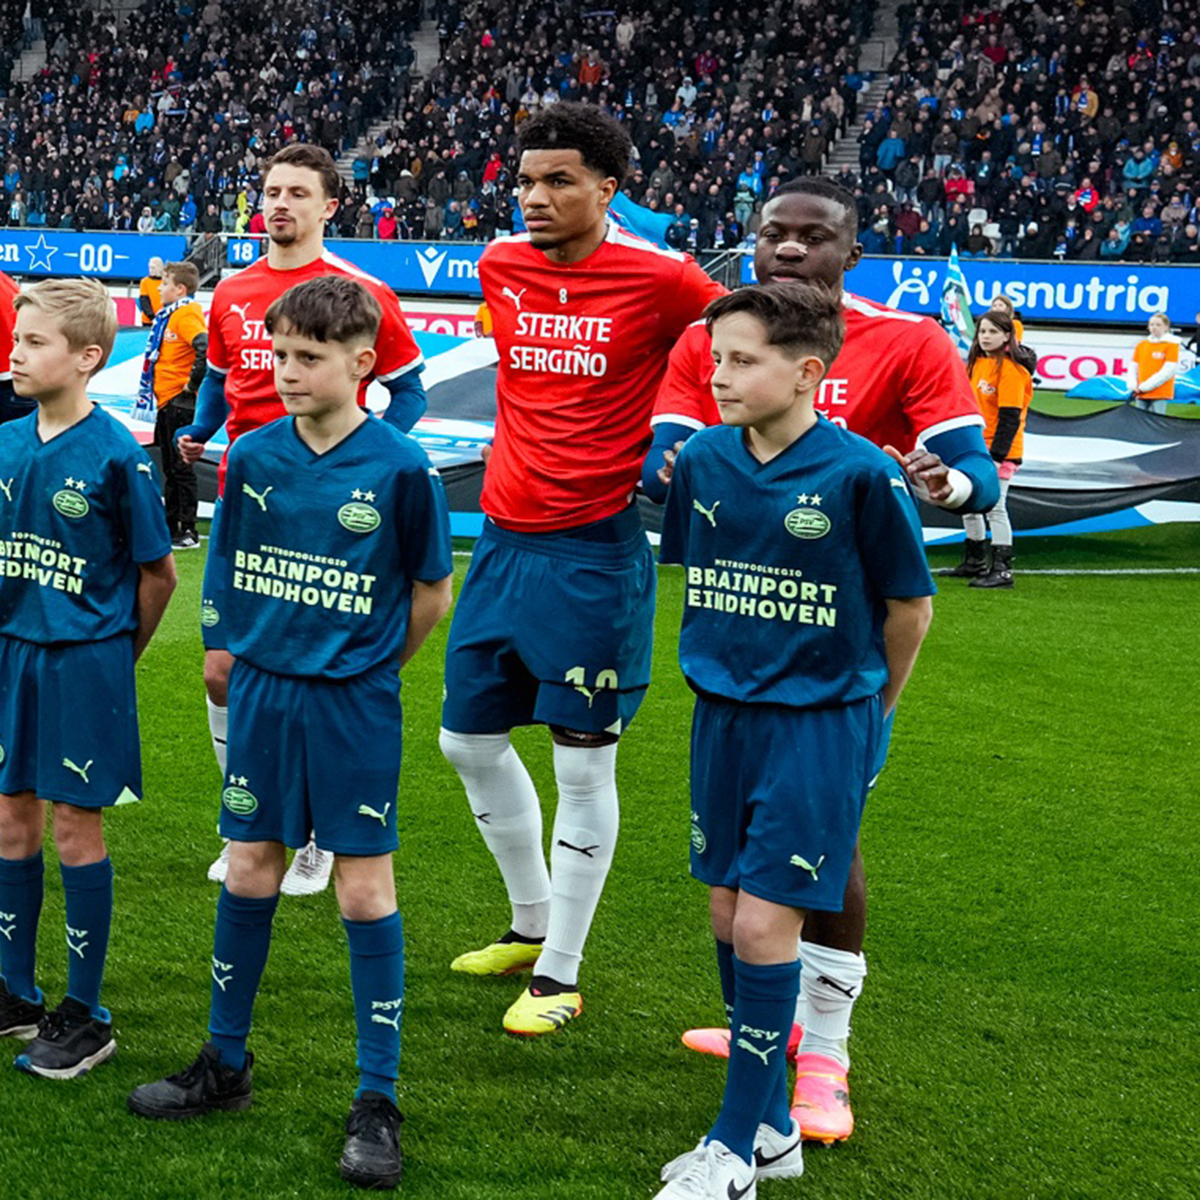 PSV ON BRINK OF DUTCH TITLE. Led by Malik Tillman brace, PSV win at Heerenveen 8-0 to give them 12-point lead over Feyenoord with 4 games to go. A Feyenoord draw or loss this afternoon would hand Eindhoven side 1st Eredivisie title since 2018. 🇺🇸🇳🇱🙌